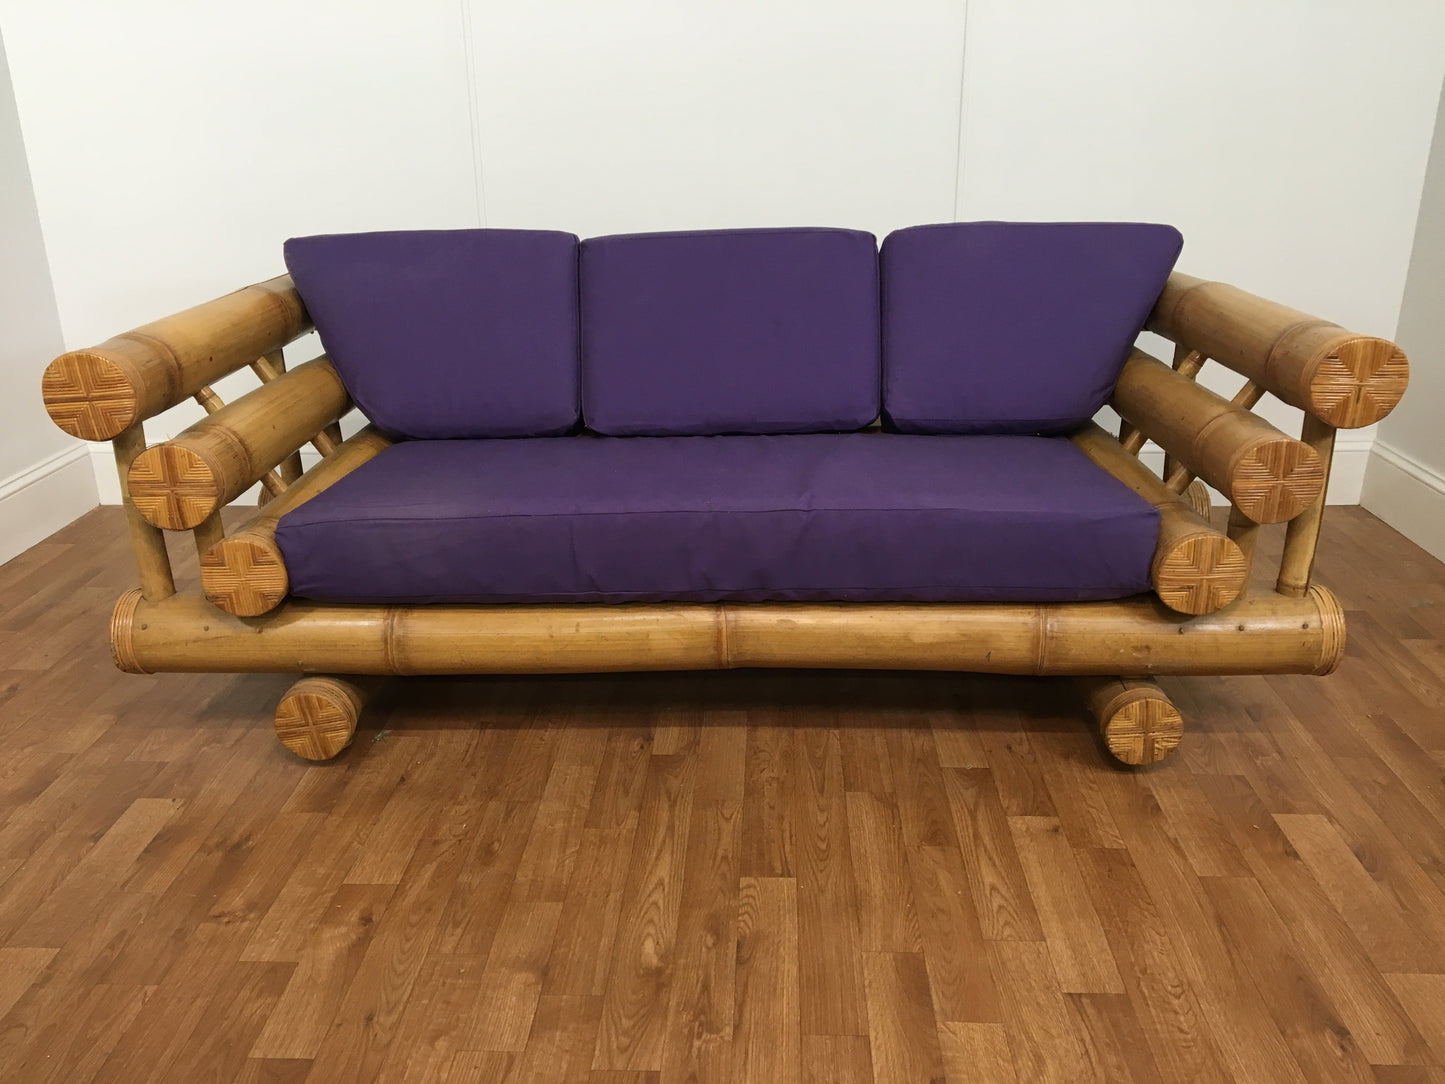 VINTAGE BAMBOO COUCH